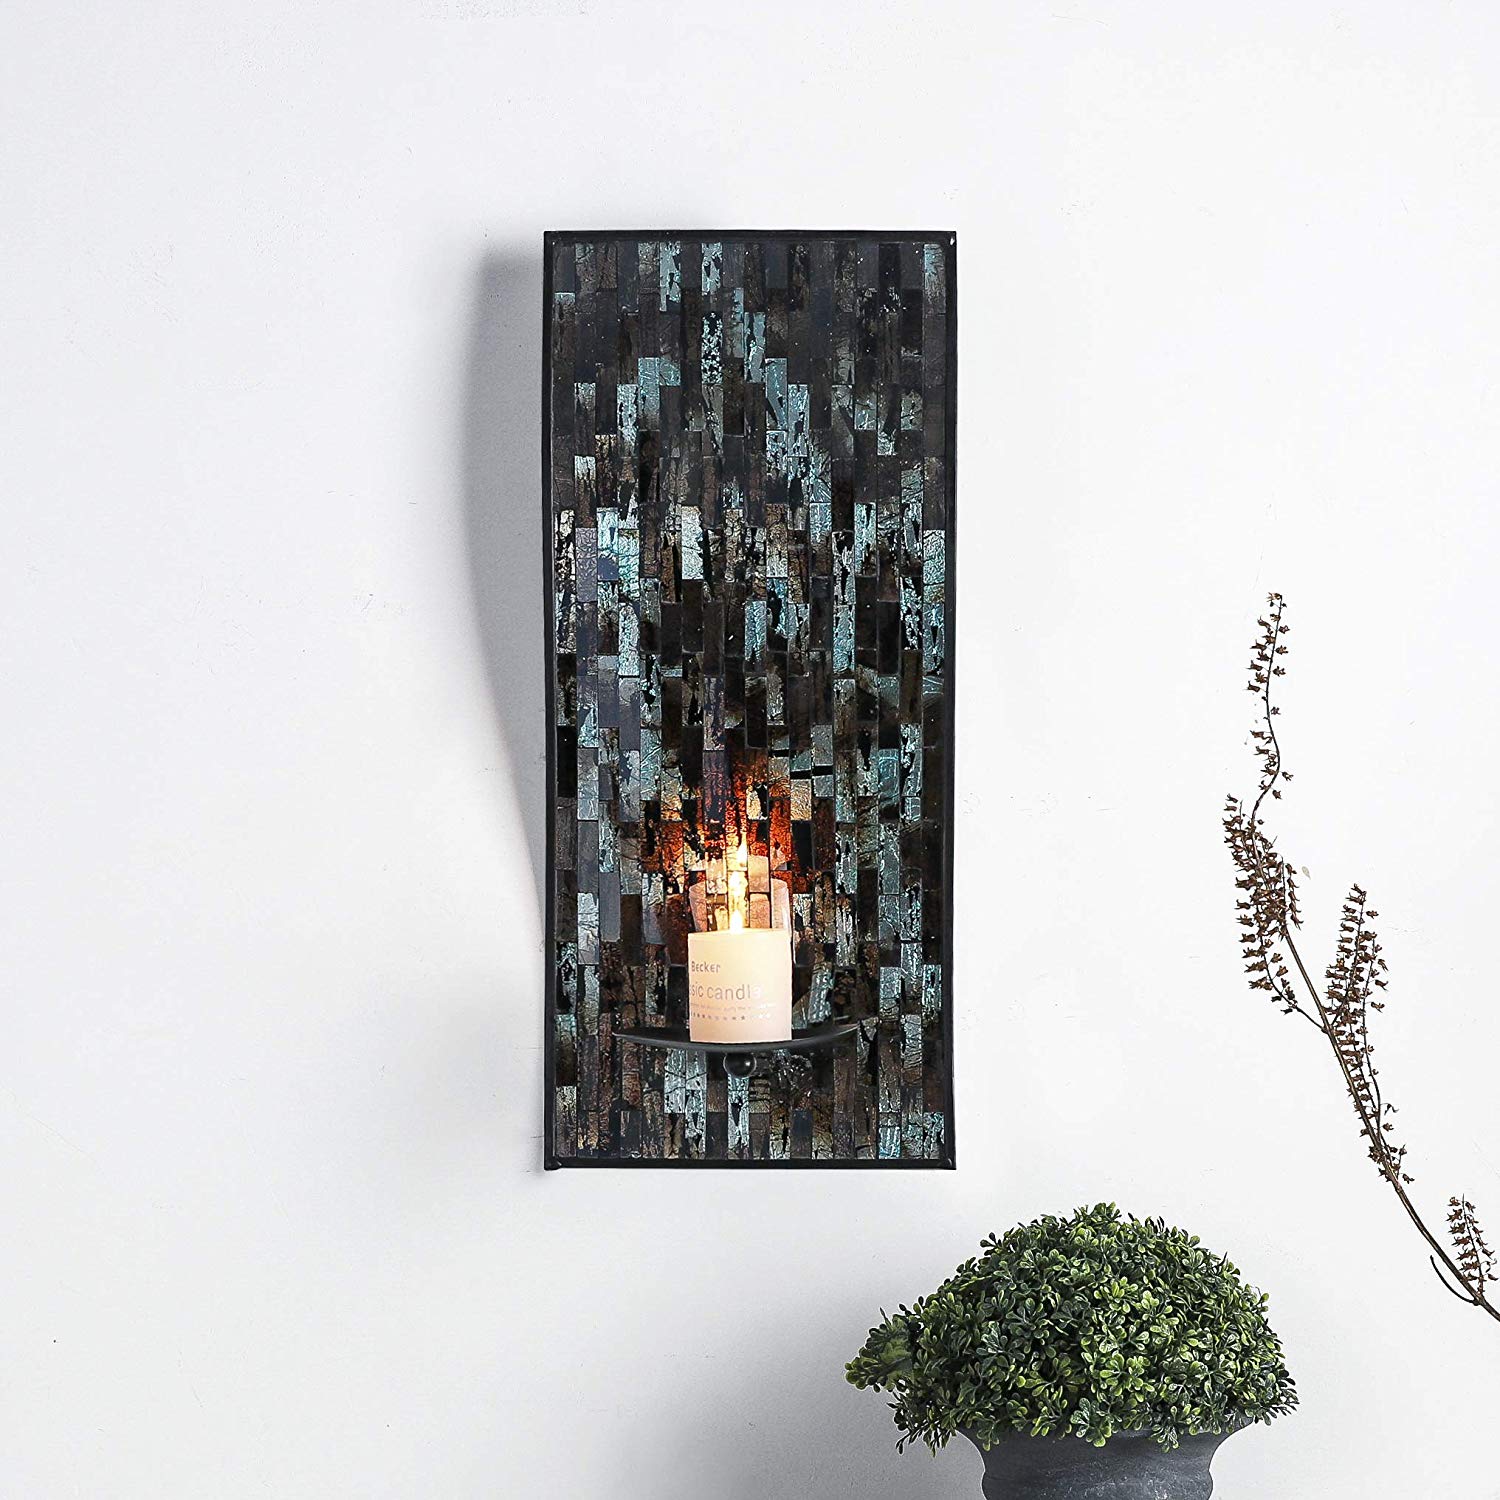 Whole Housewares 8 x 18 Inches Decorative Metal Wall Candle Sconce - Mosaic Glass Set of 2(Blue/Brown)